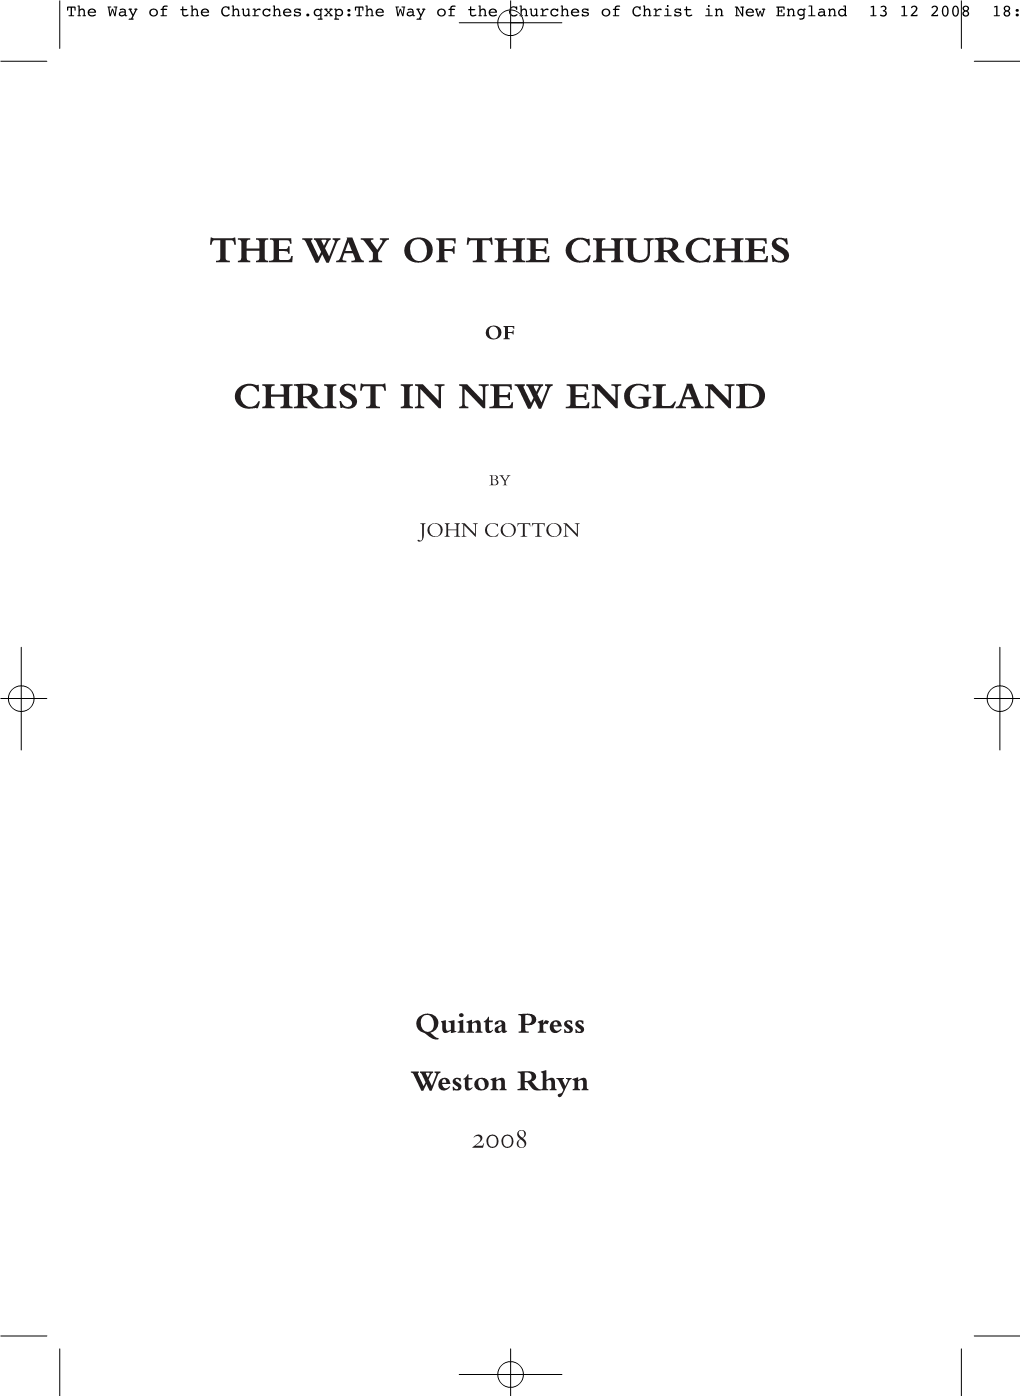 The Way of the Churches of Christ in New England 13 12 2008 18